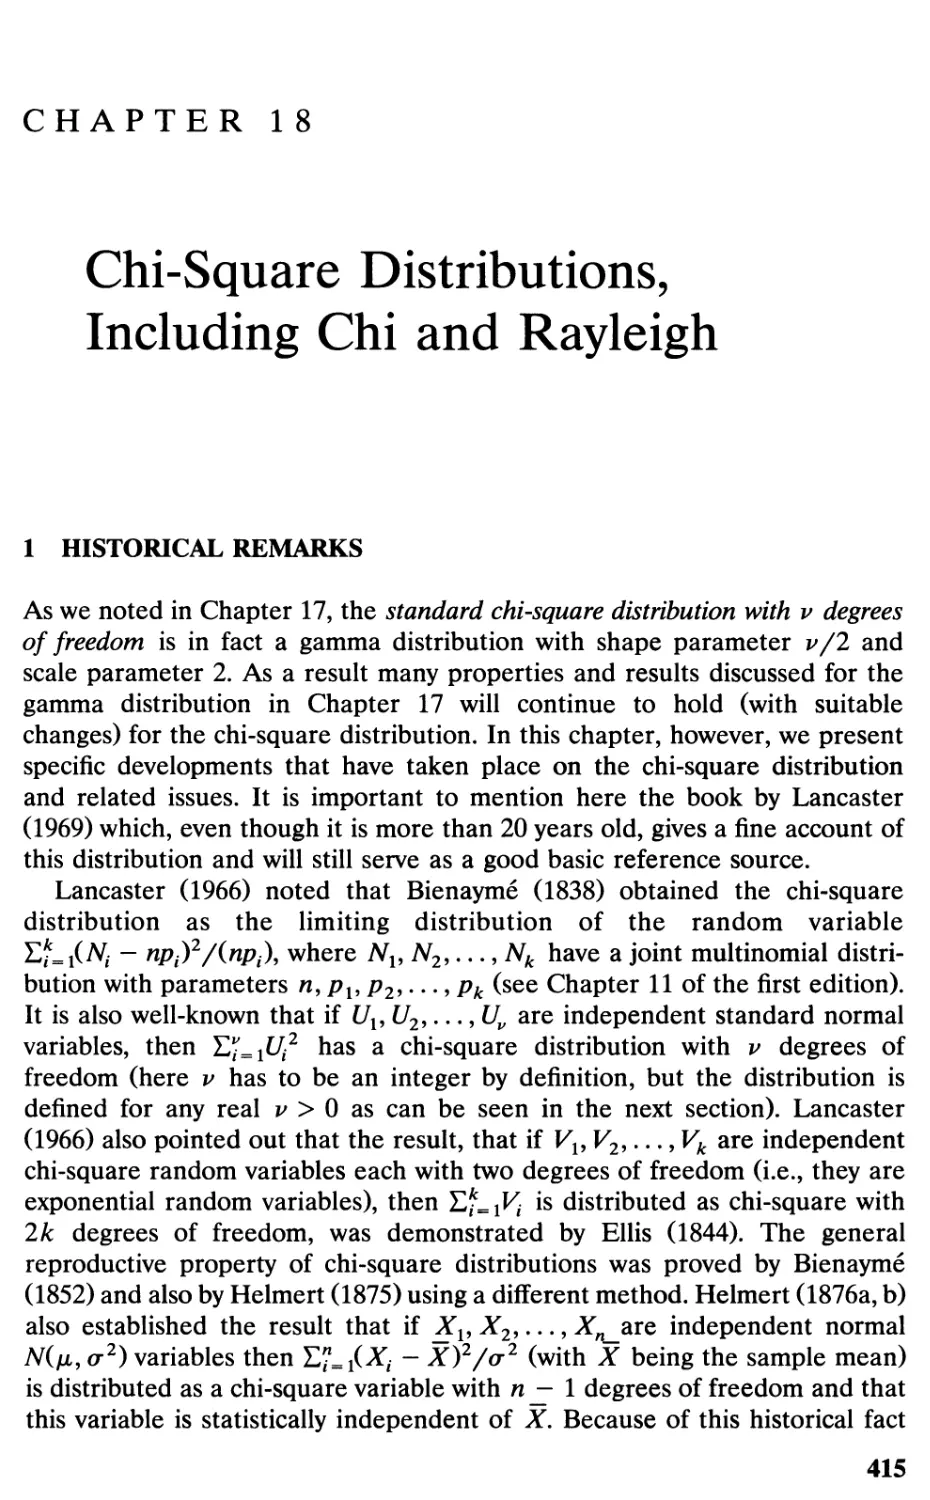 18 Chi-Square Distributions Including Chi and Rayleigh 415